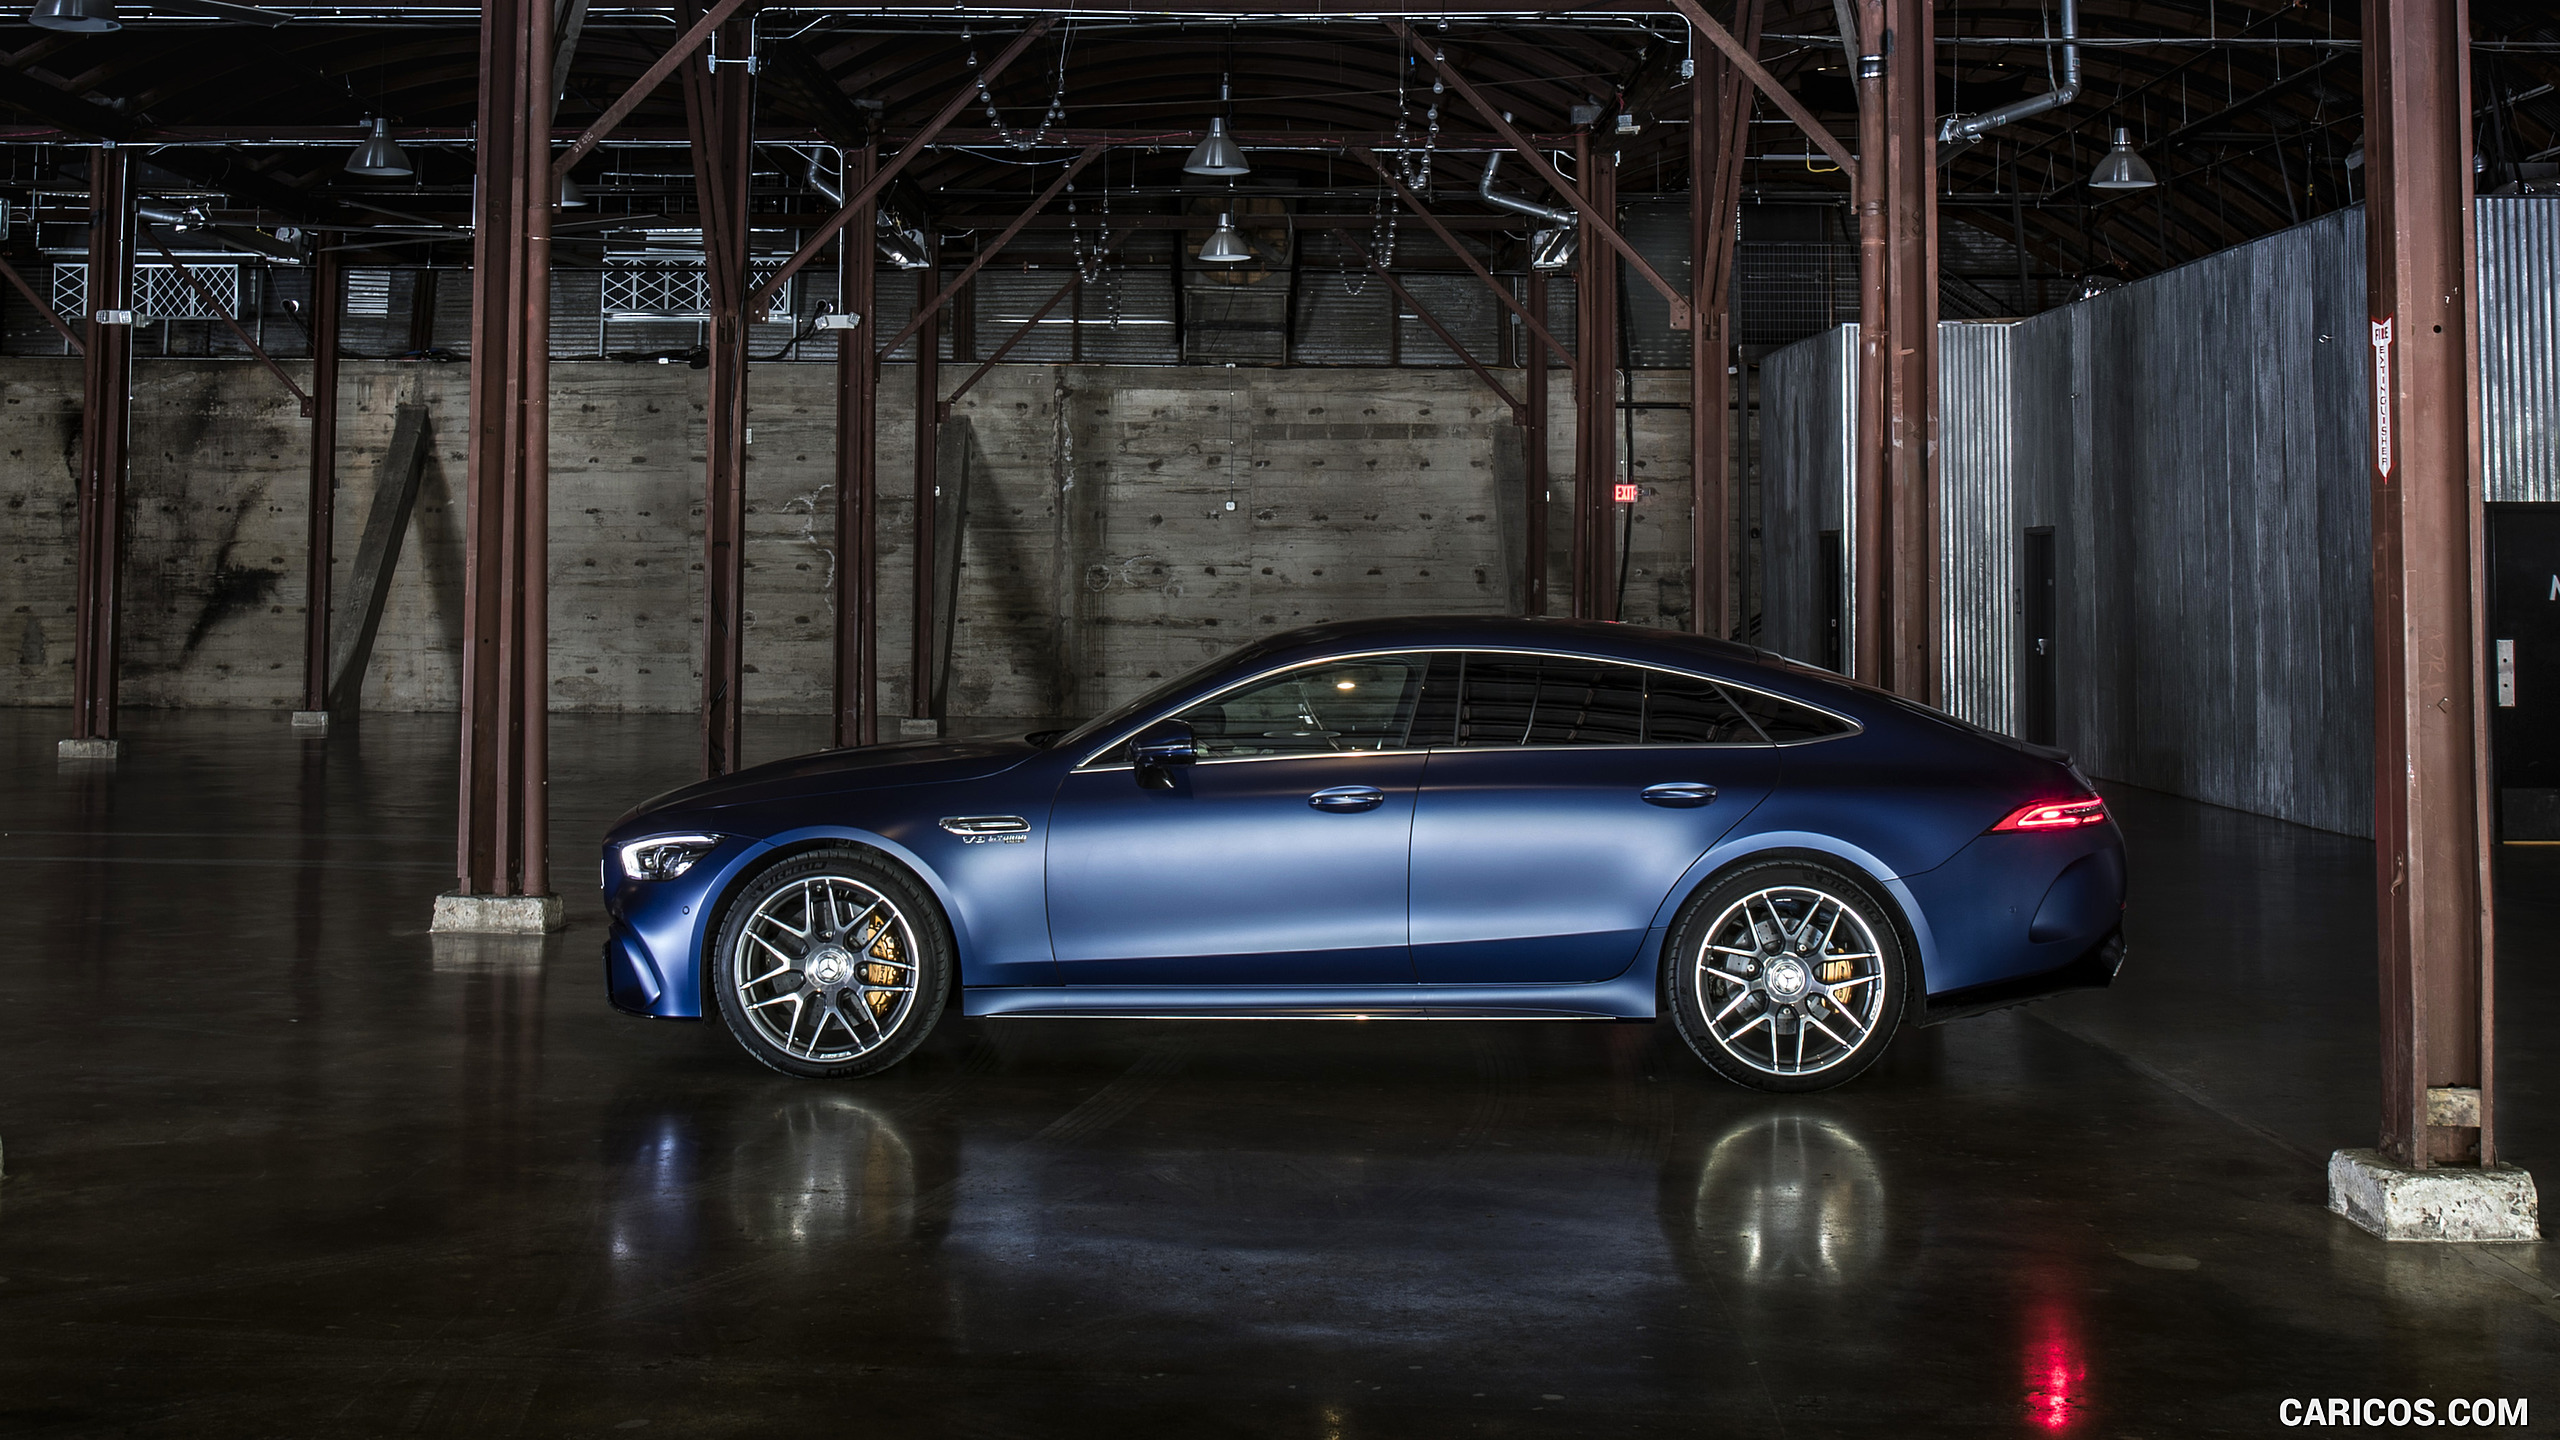 2019 Mercedes-AMG GT 63 S 4MATIC+ 4-Door Coupe - Side, #143 of 427